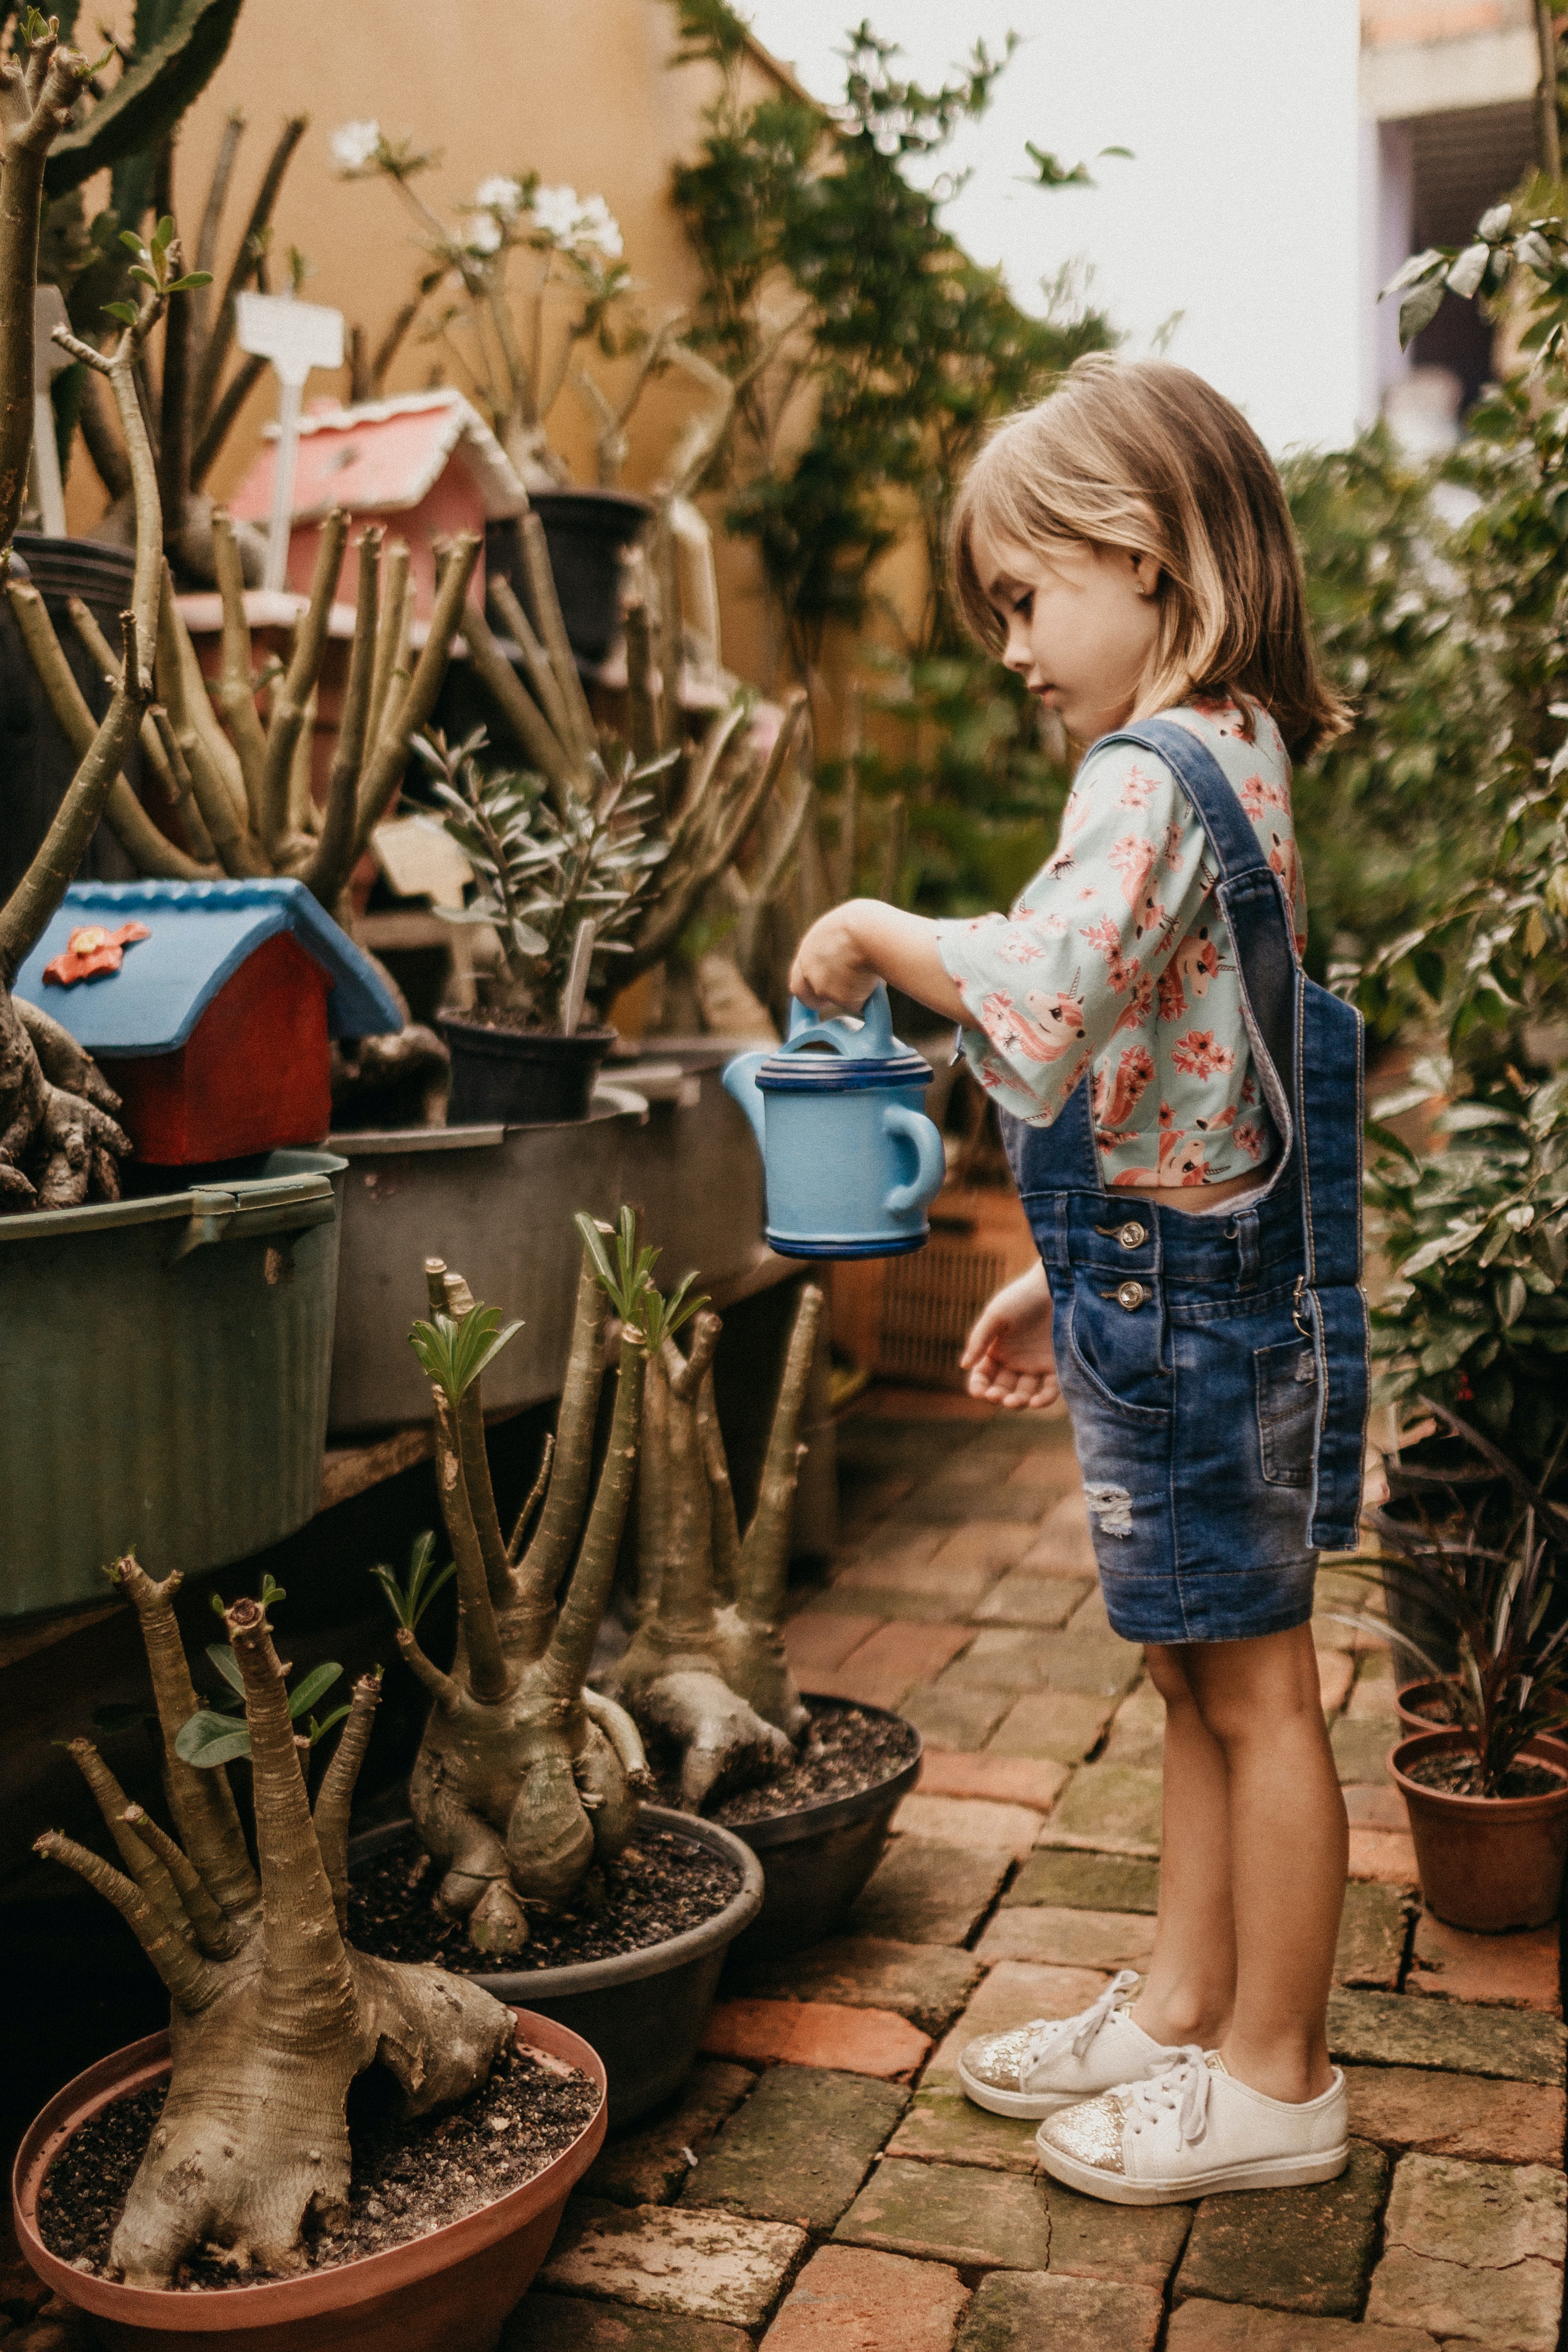 A girl watering plants